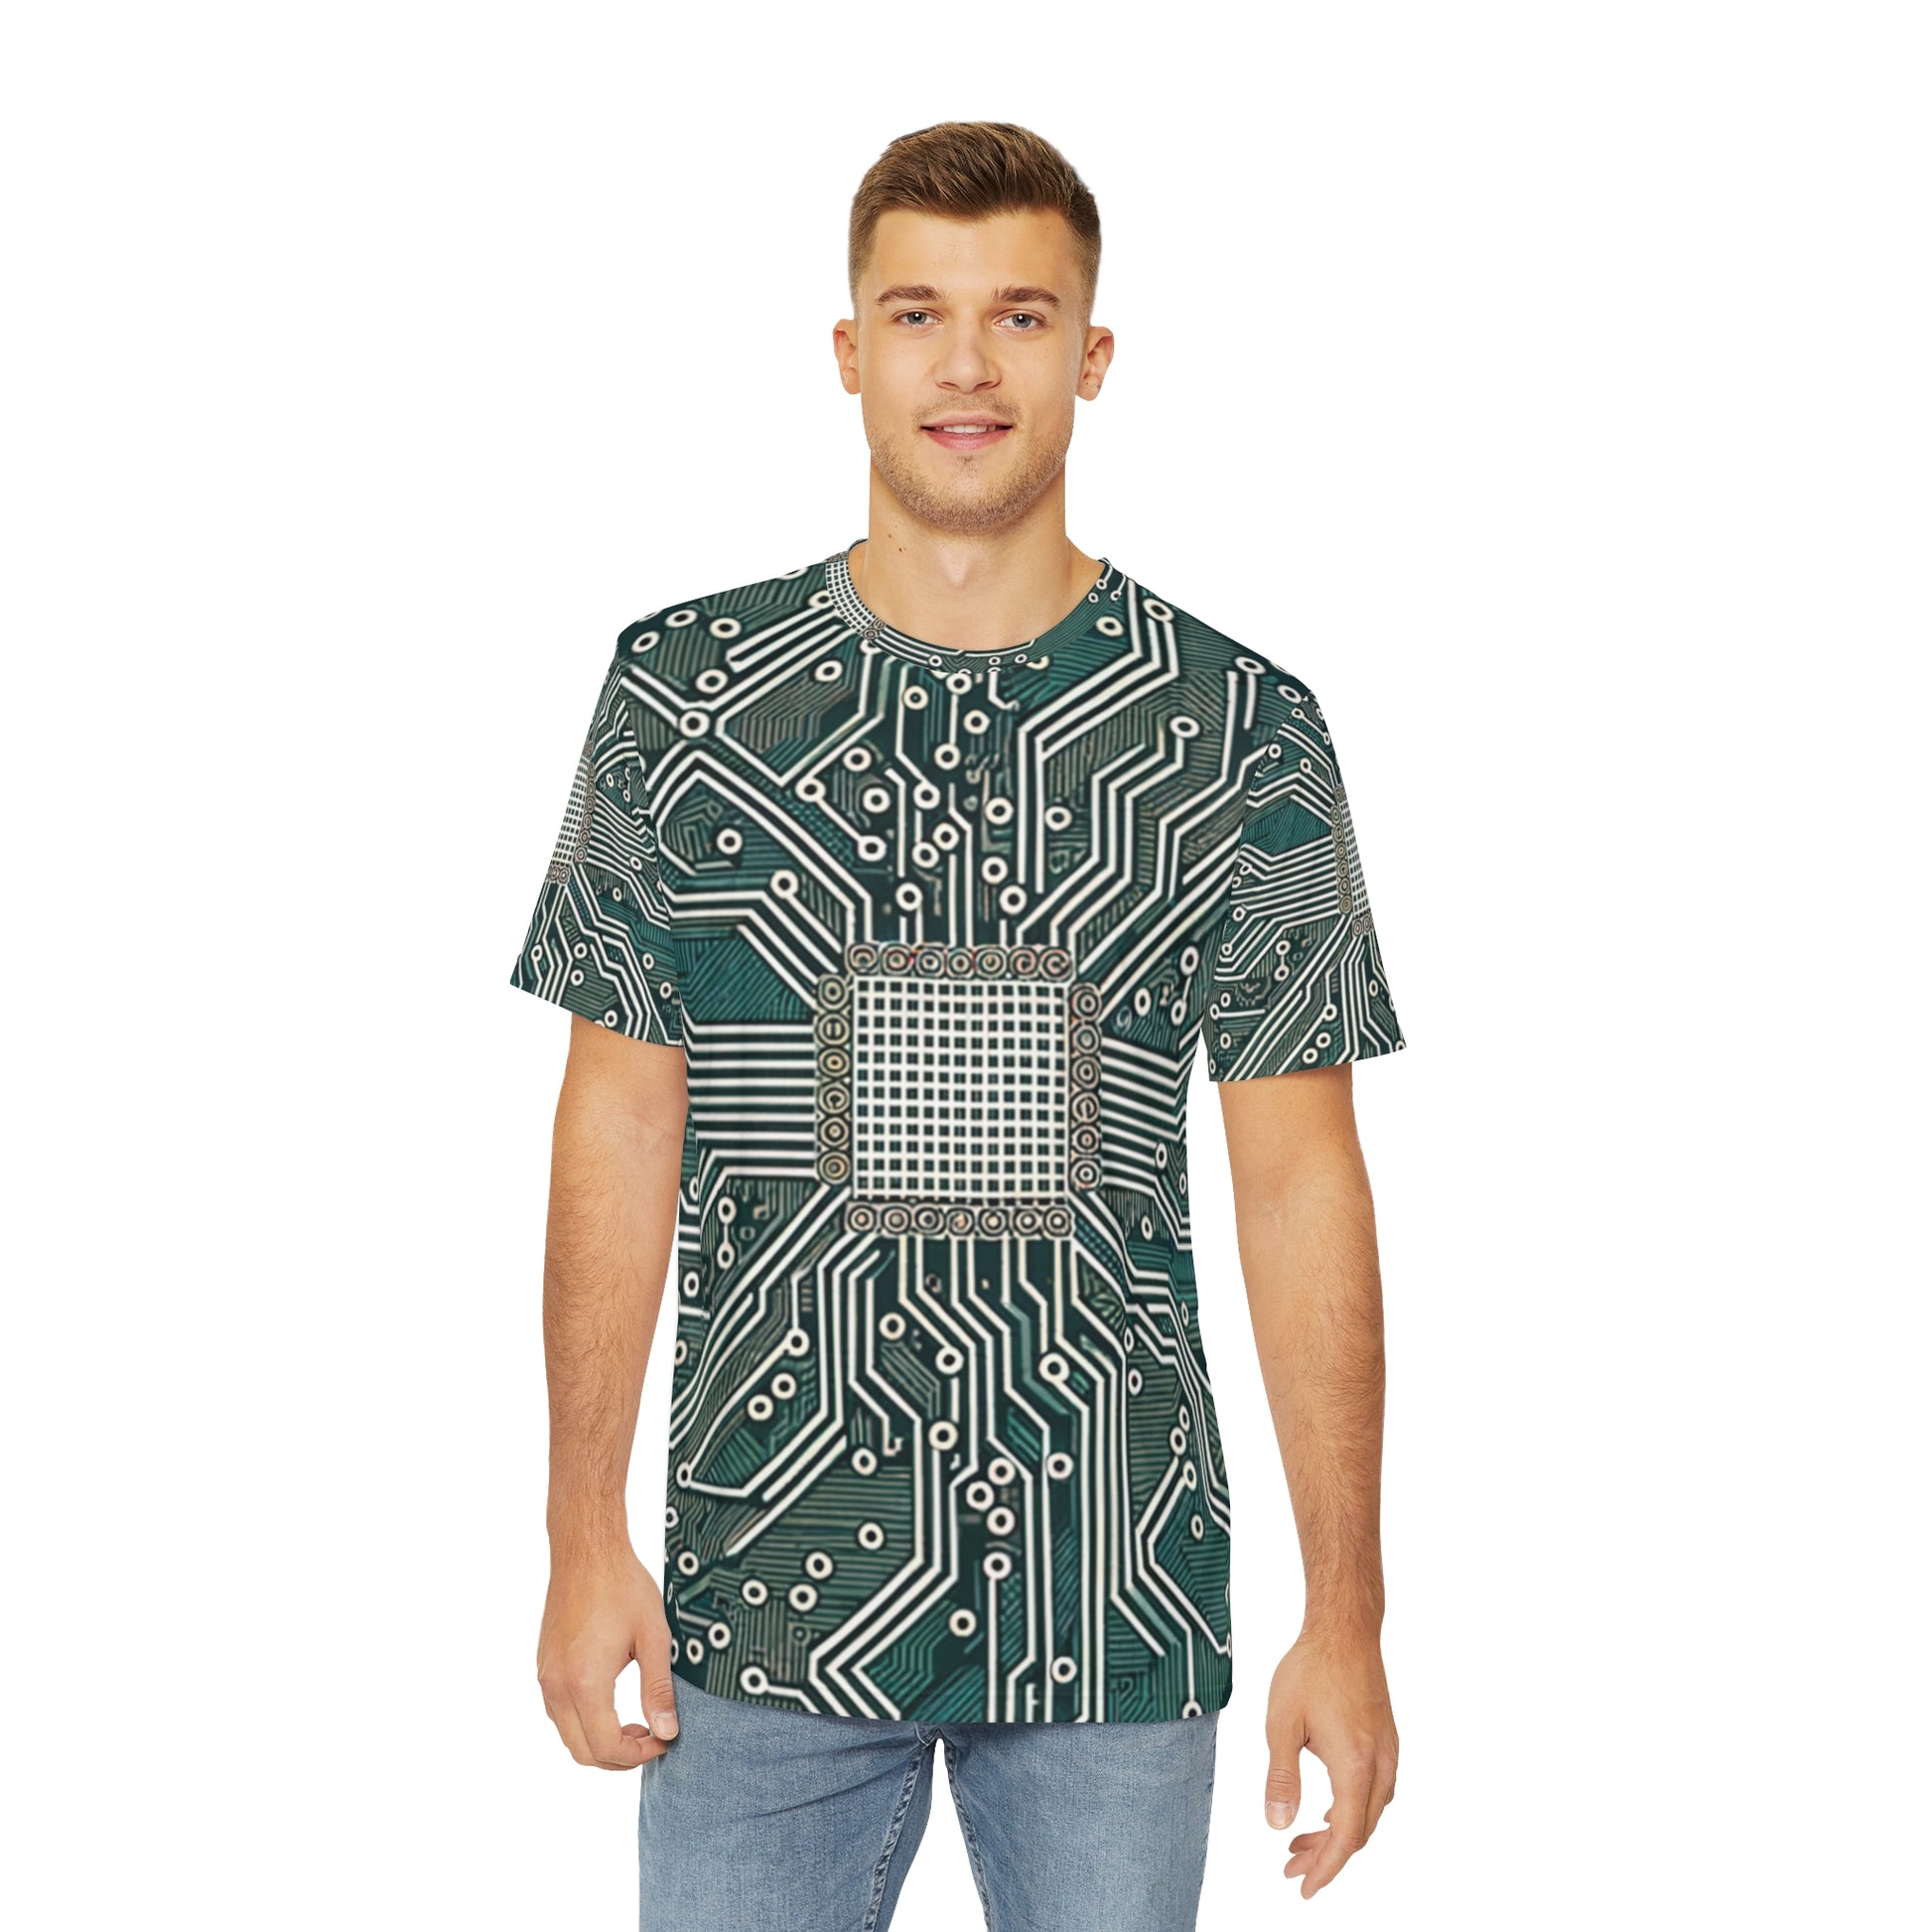 Front view of the Circuit Symmetry Matrix Crewneck Pullover All-Over Print Short-Sleeved Shirt green gray black beige circuit pattern paired with casual denim pants worn by a white man